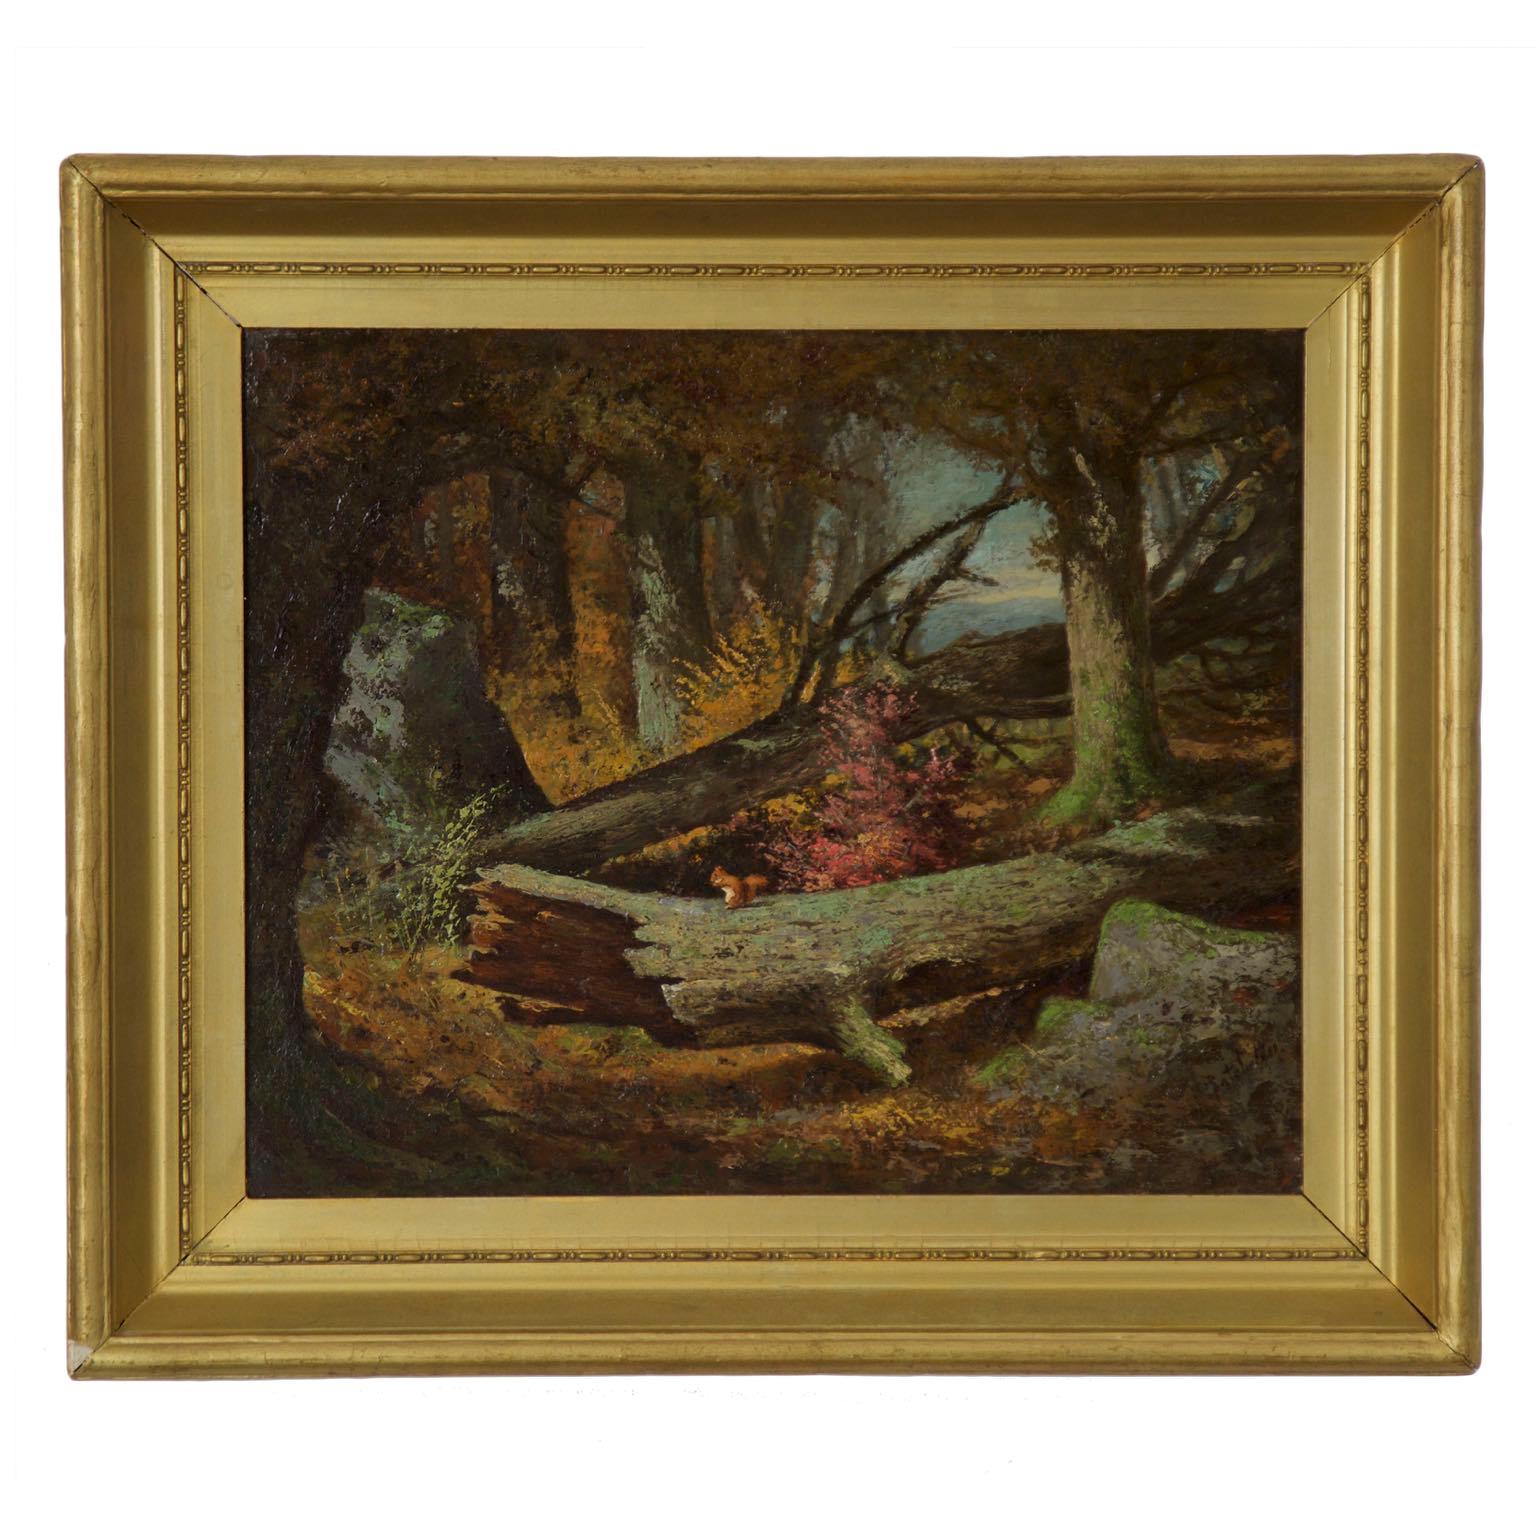 Antique Oil Painting of Squirrel by Frederick Batcheller